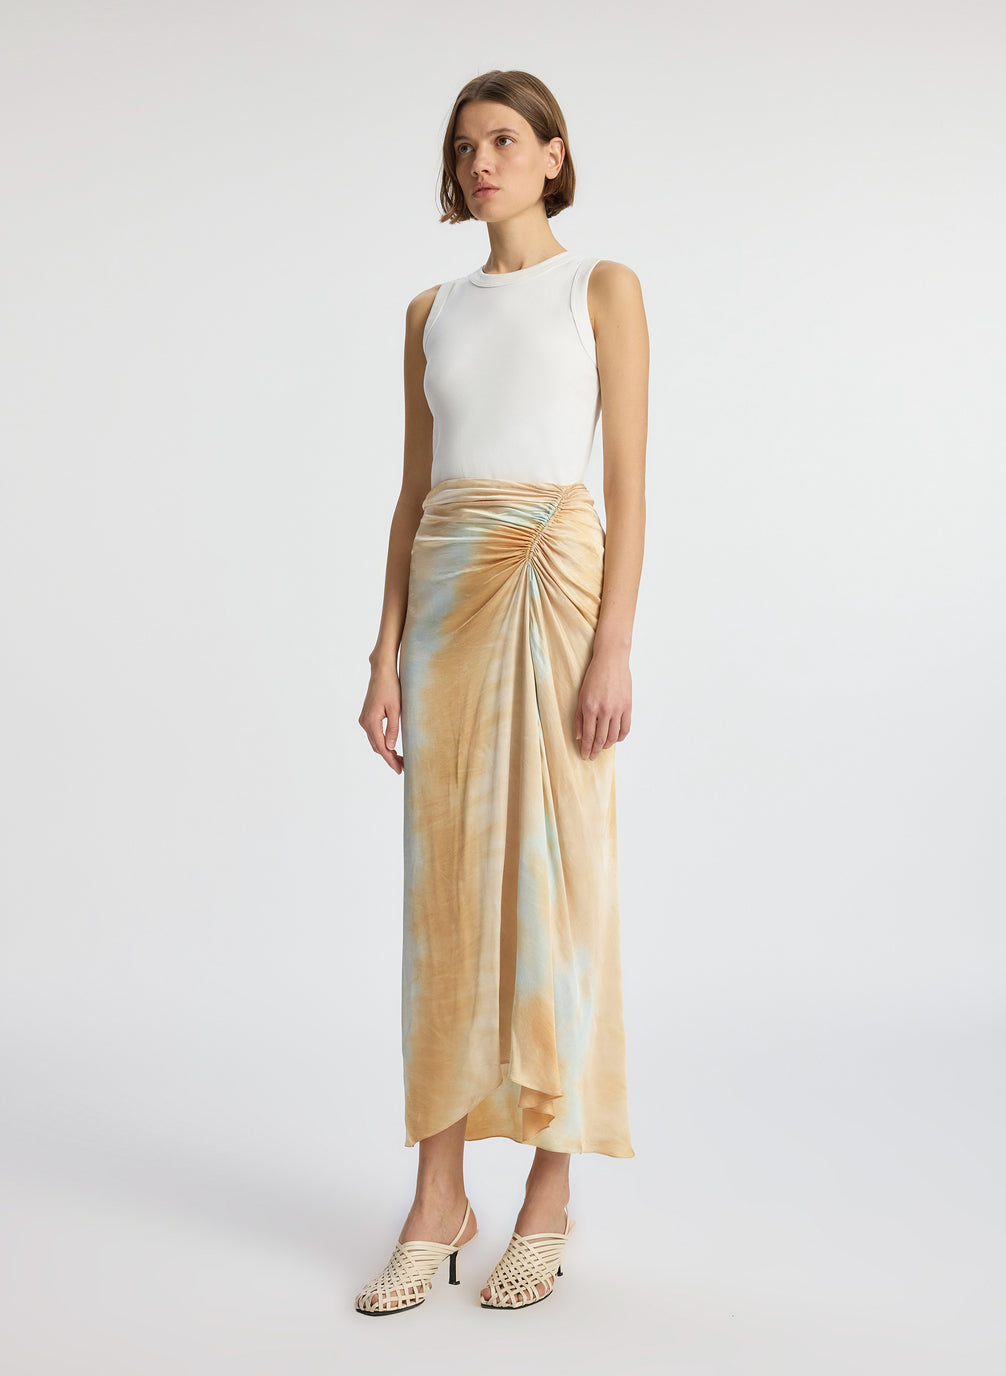 side view of woman wearing white tank top and blue and beige midi skirt